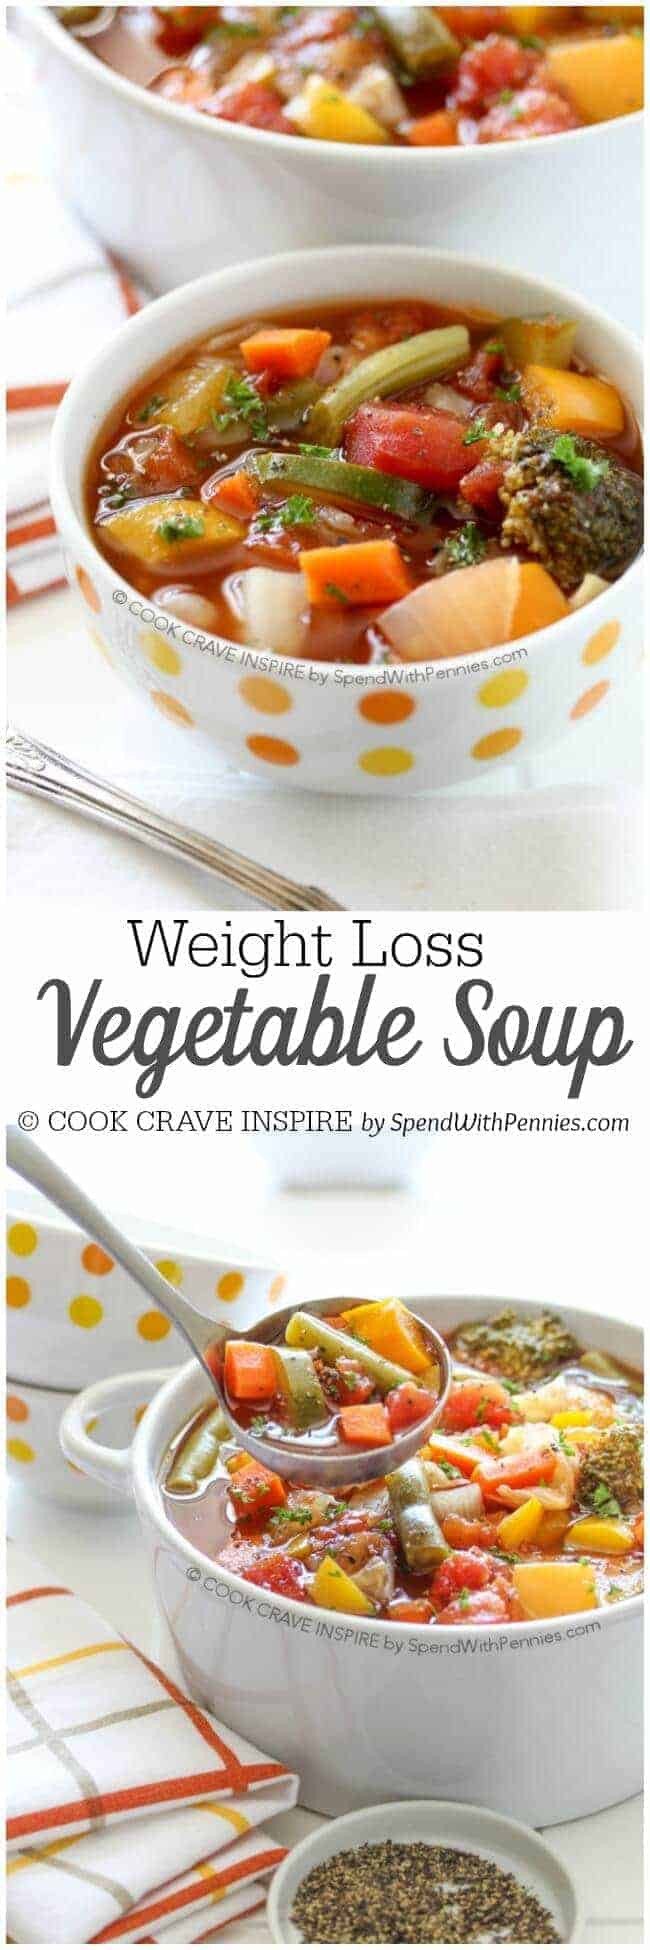 Healthy Vegetable Recipes For Weight Loss
 Weight Loss Ve able Soup Recipe Spend With Pennies